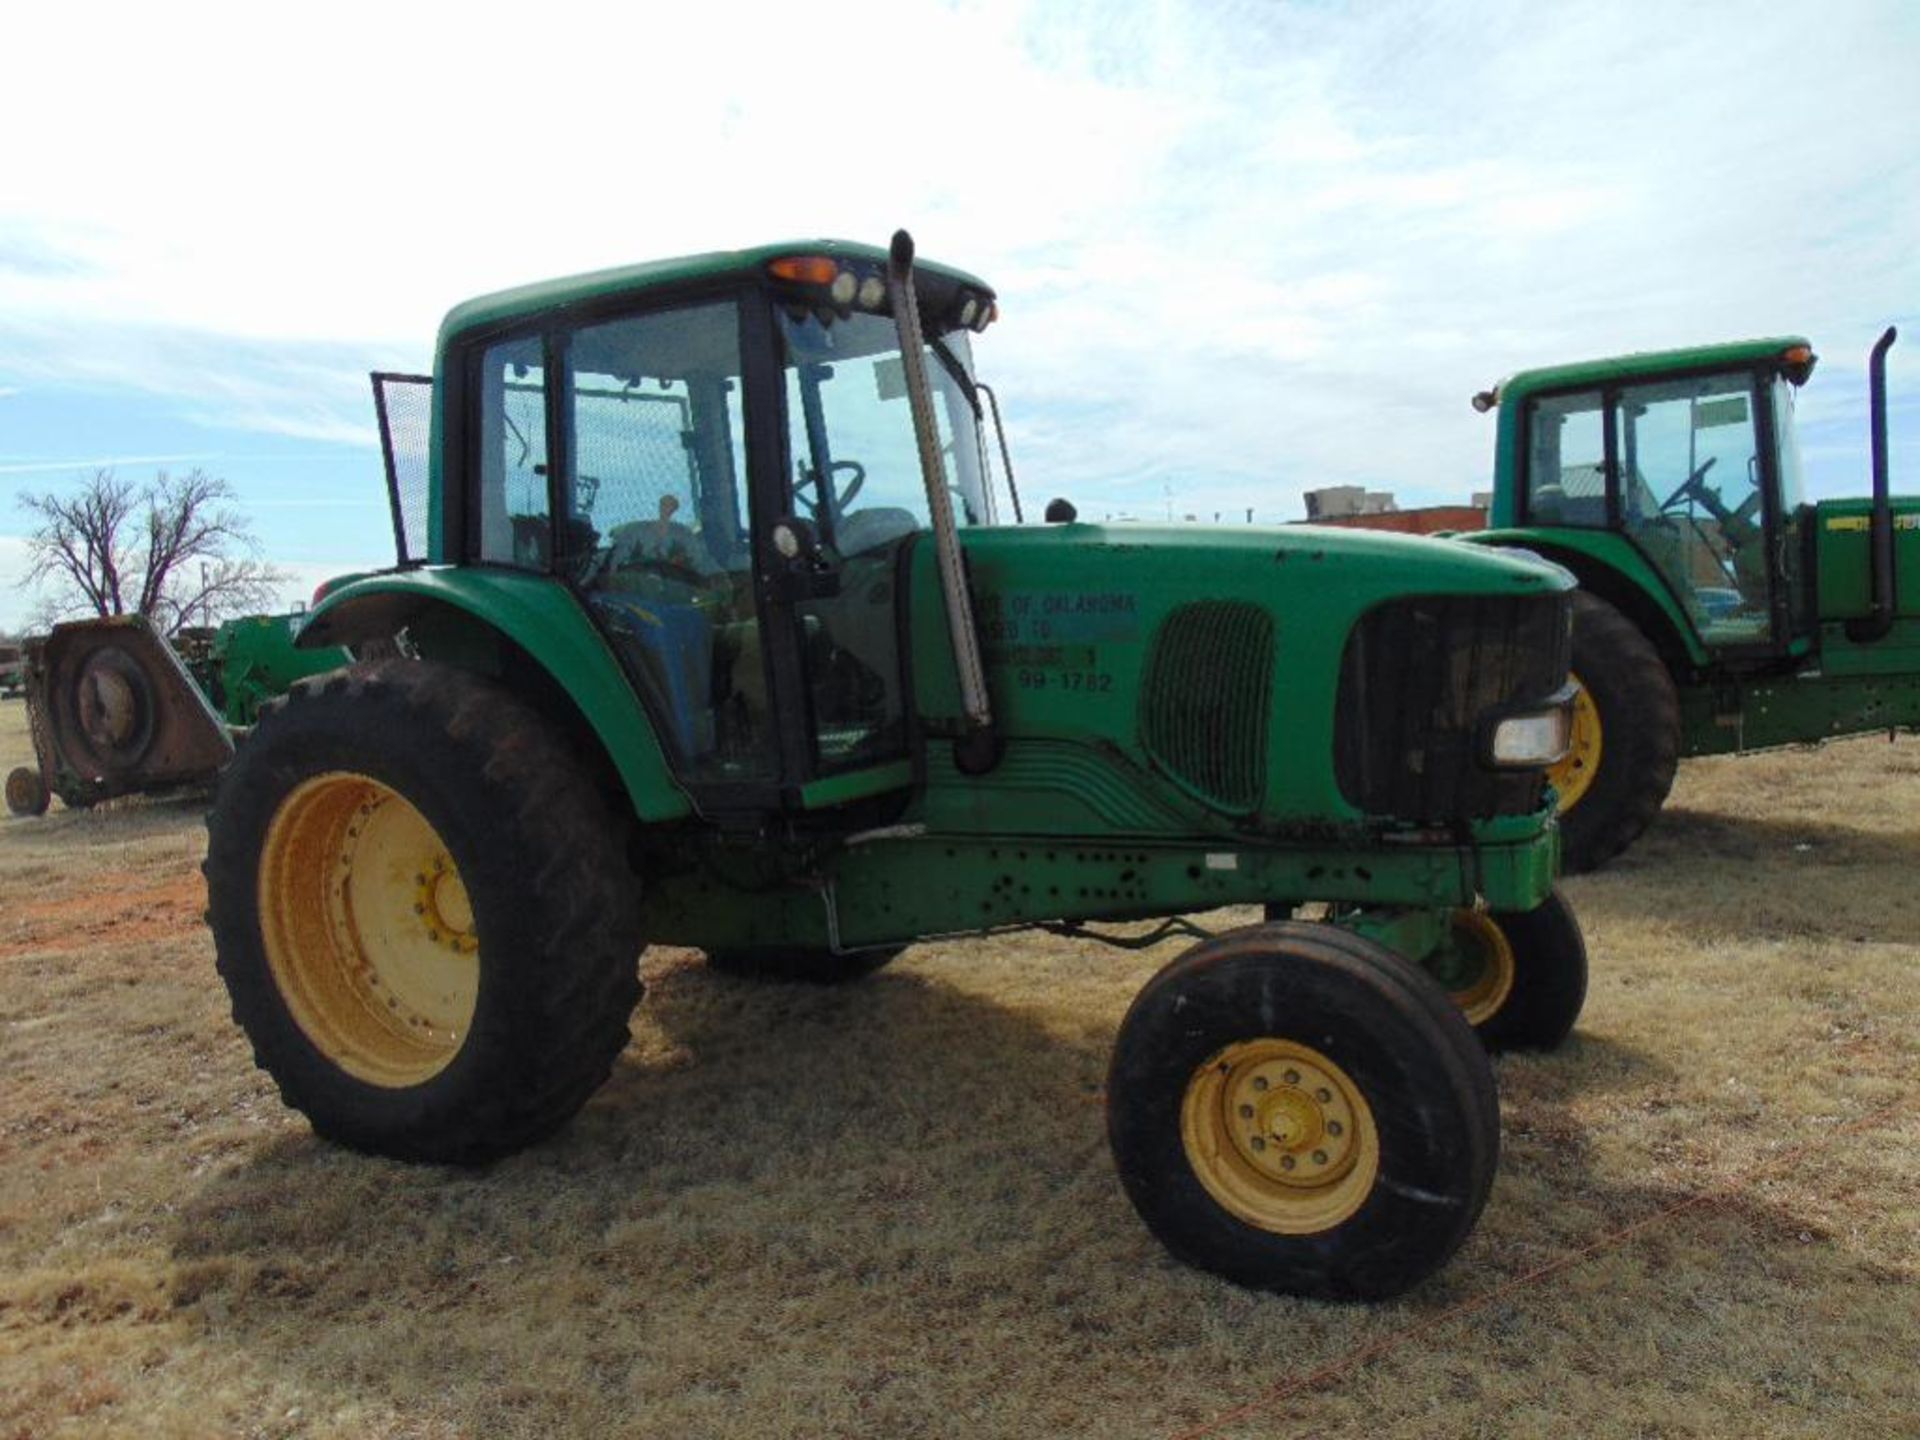 2003 John Deere 7220 Farm Tractor s/n 003071 Cab,a/c, 3pt, pto, hyd outlets